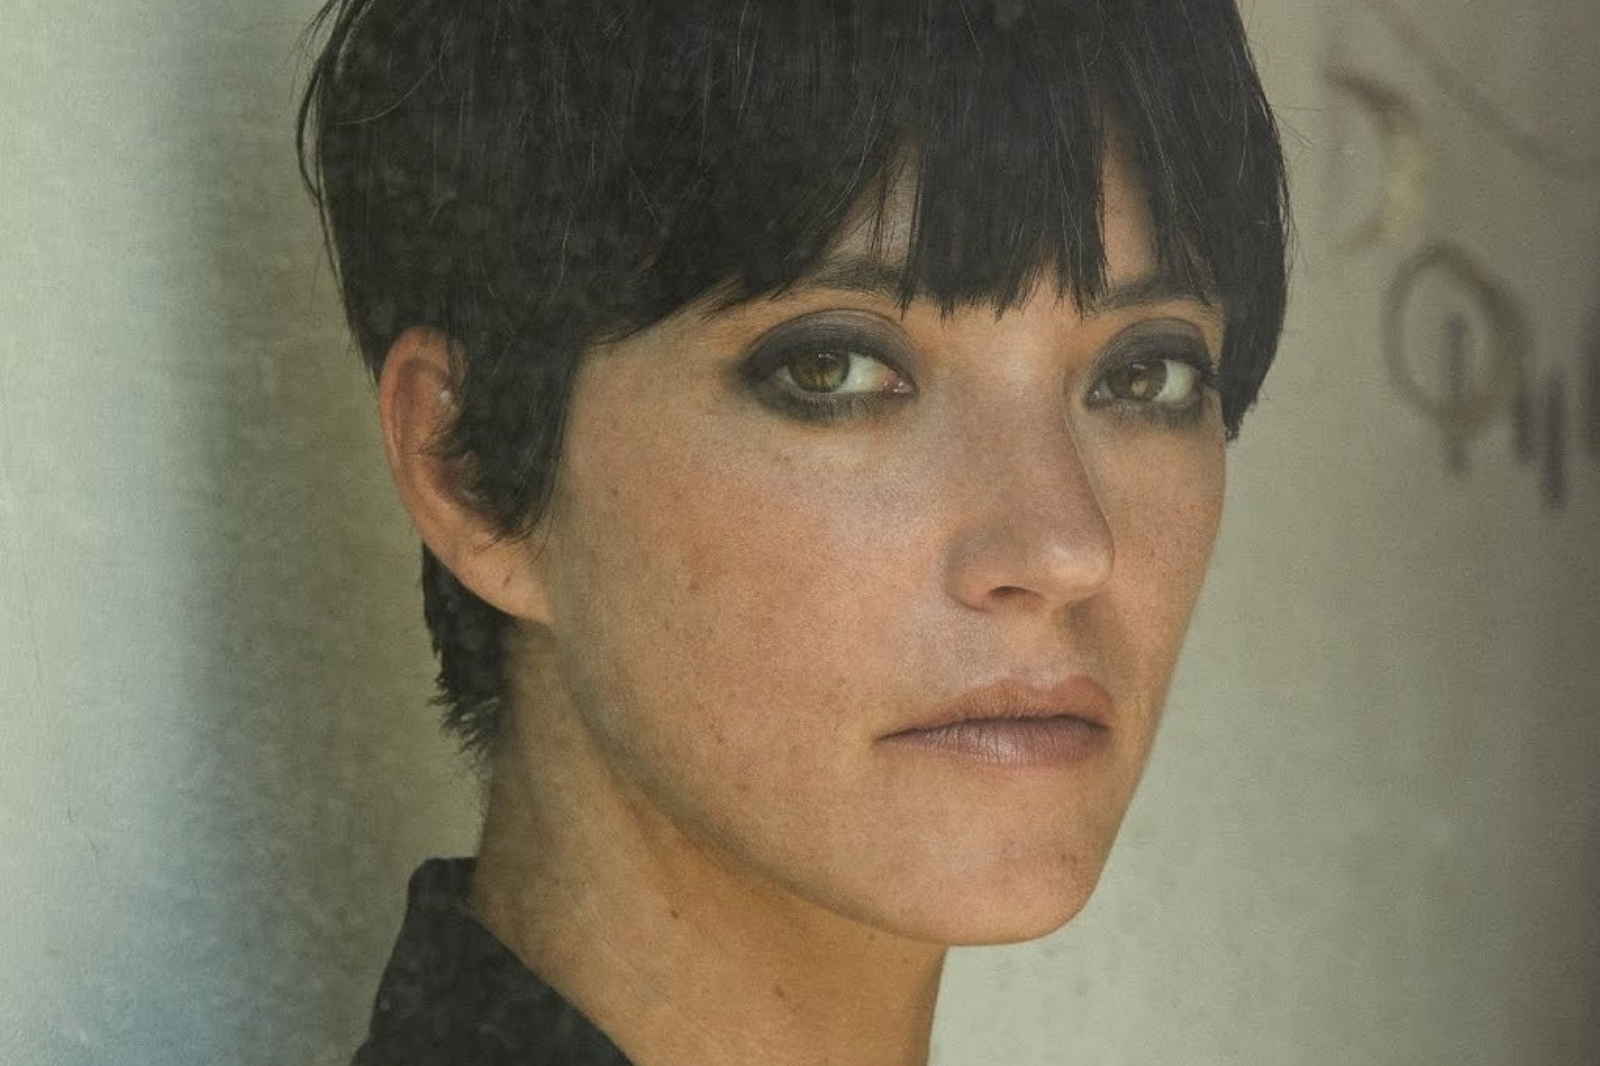 Sharon Van Etten announces deluxe edition of 'We've Been Going About This All Wrong'